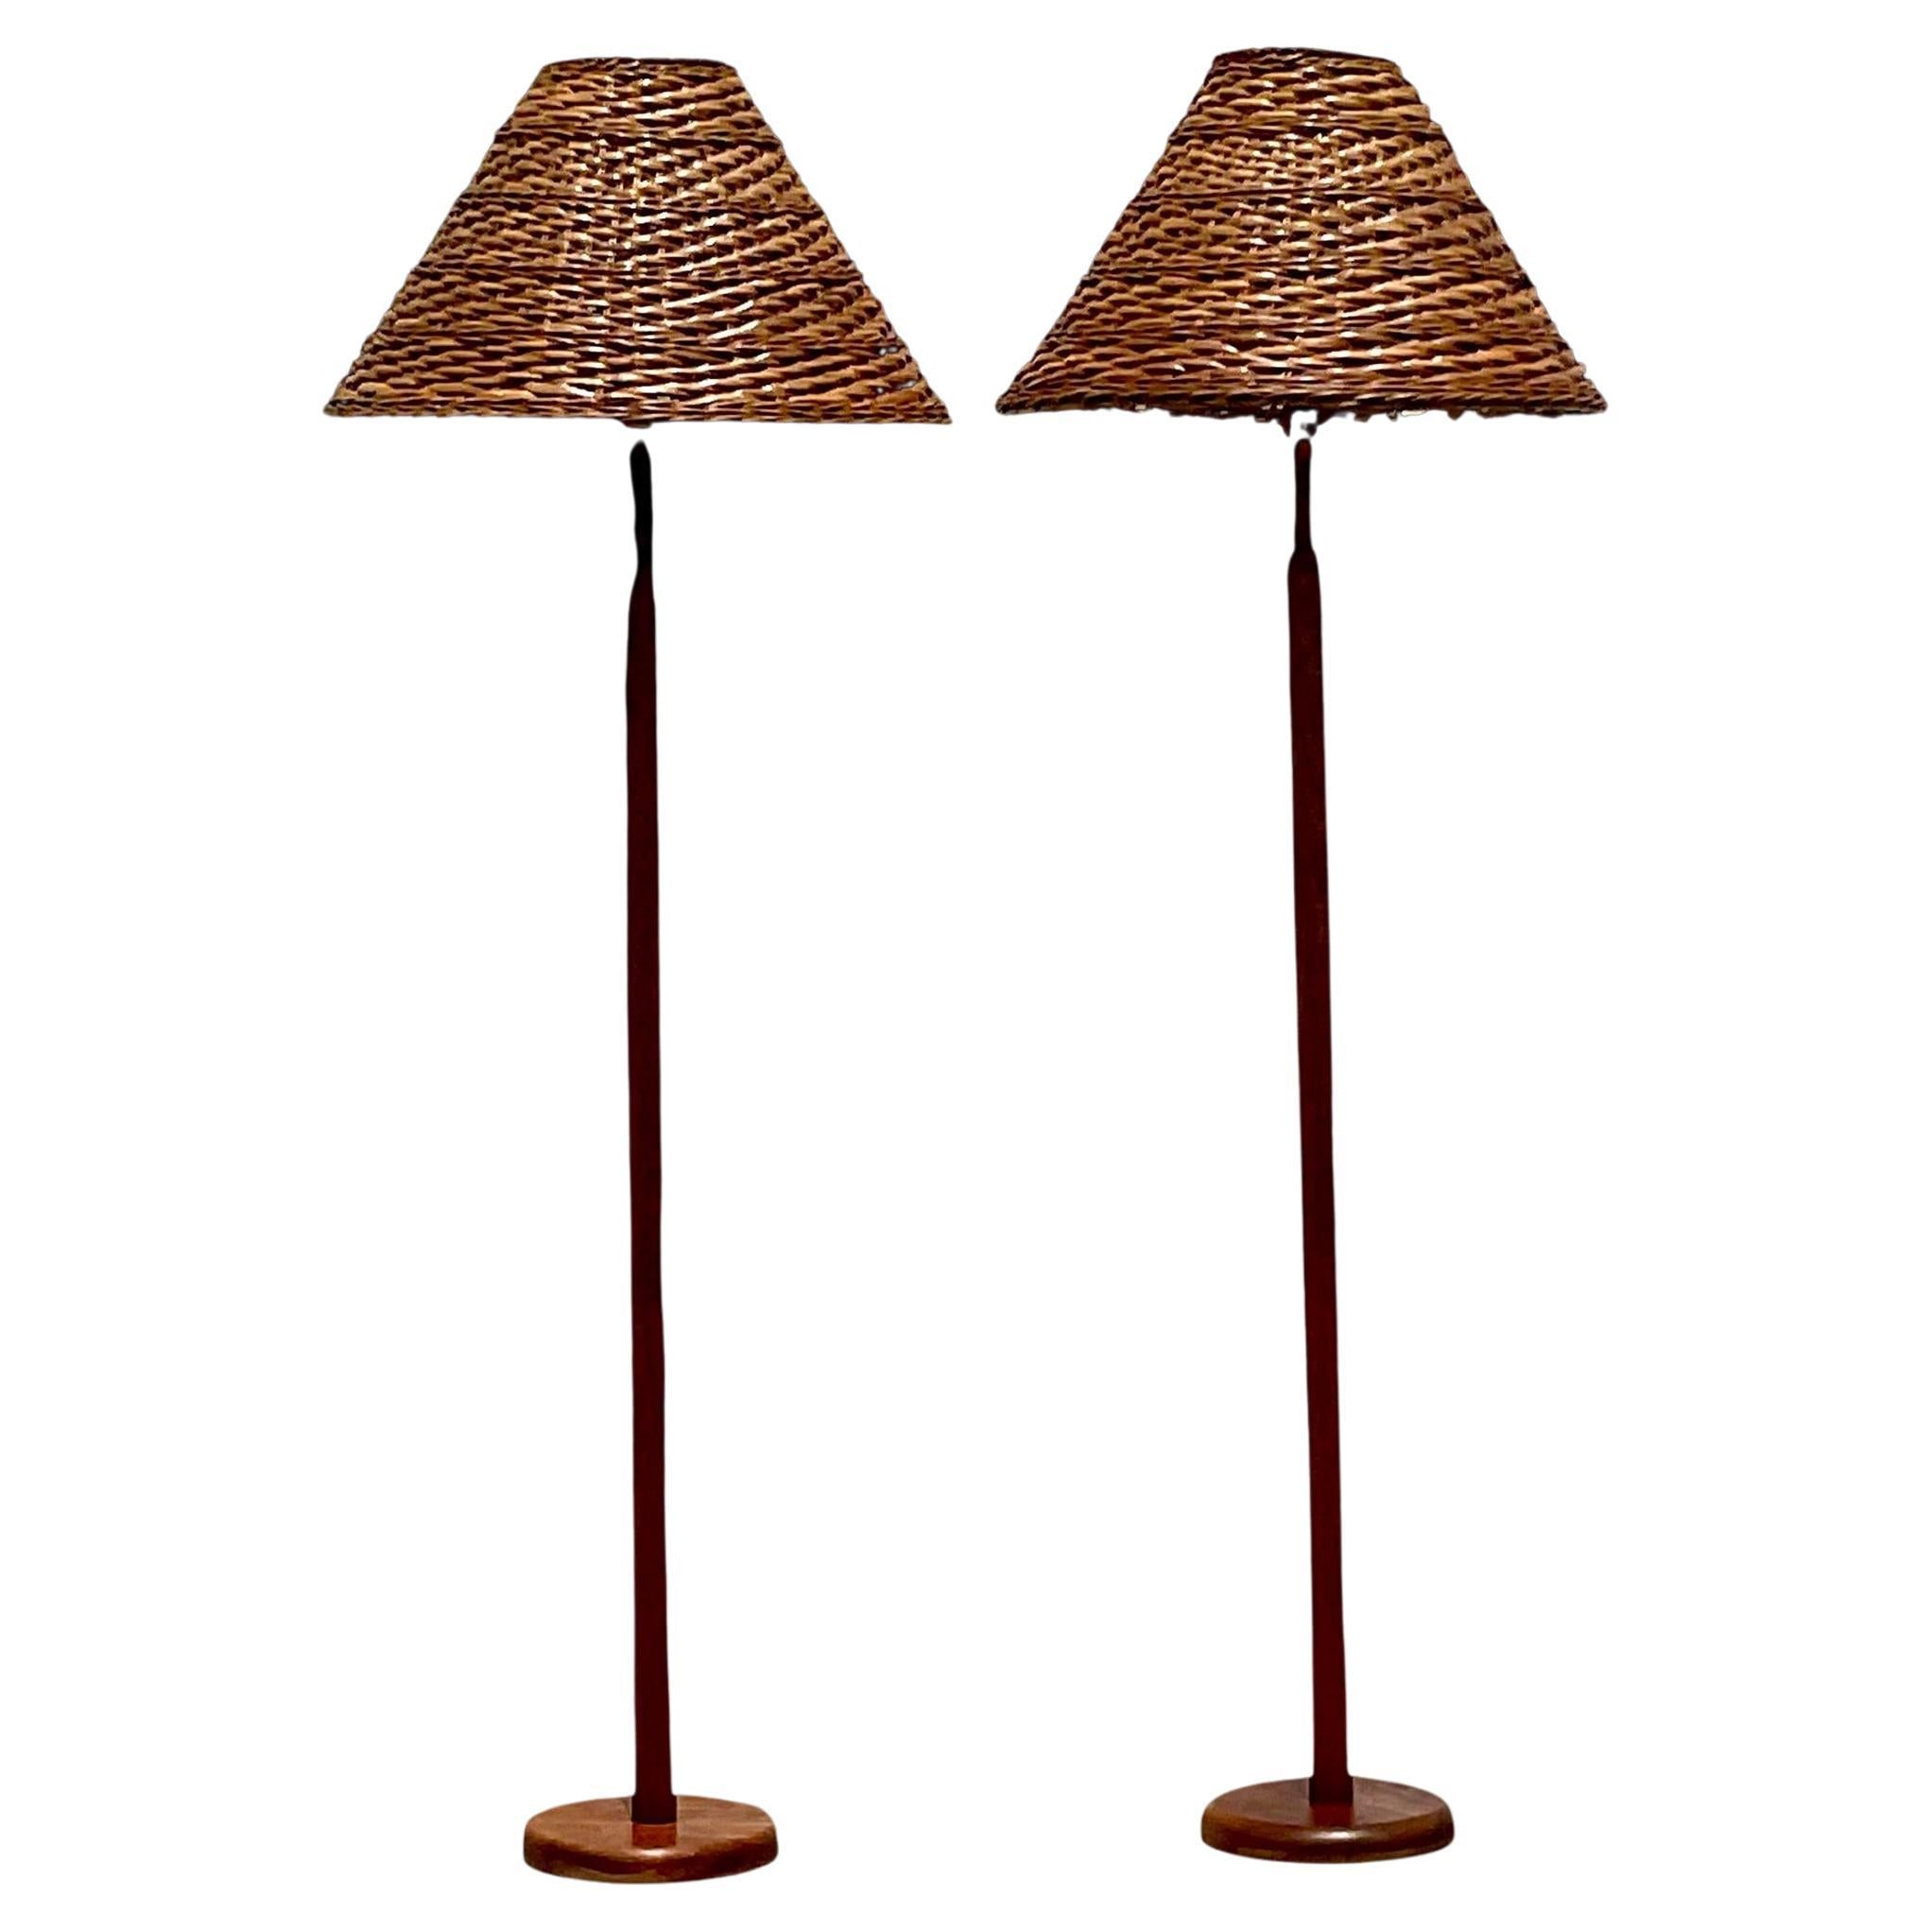 Vintage Late 20th Century Teak Floor Lamps With Woven Rattan Shades - a Pair